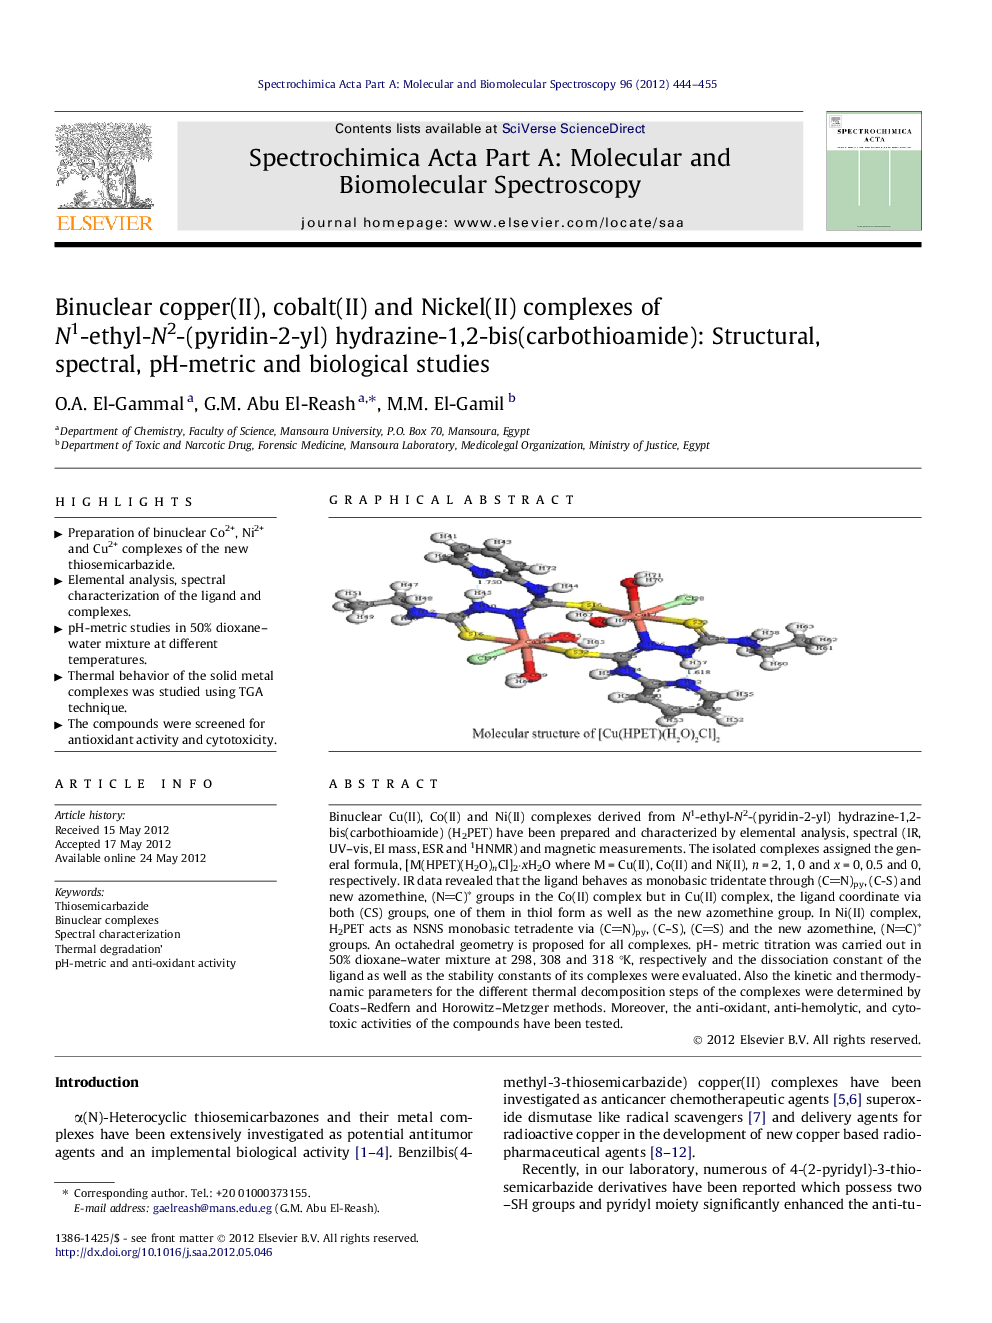 Binuclear copper(II), cobalt(II) and Nickel(II) complexes of N1-ethyl-N2-(pyridin-2-yl) hydrazine-1,2-bis(carbothioamide): Structural, spectral, pH-metric and biological studies